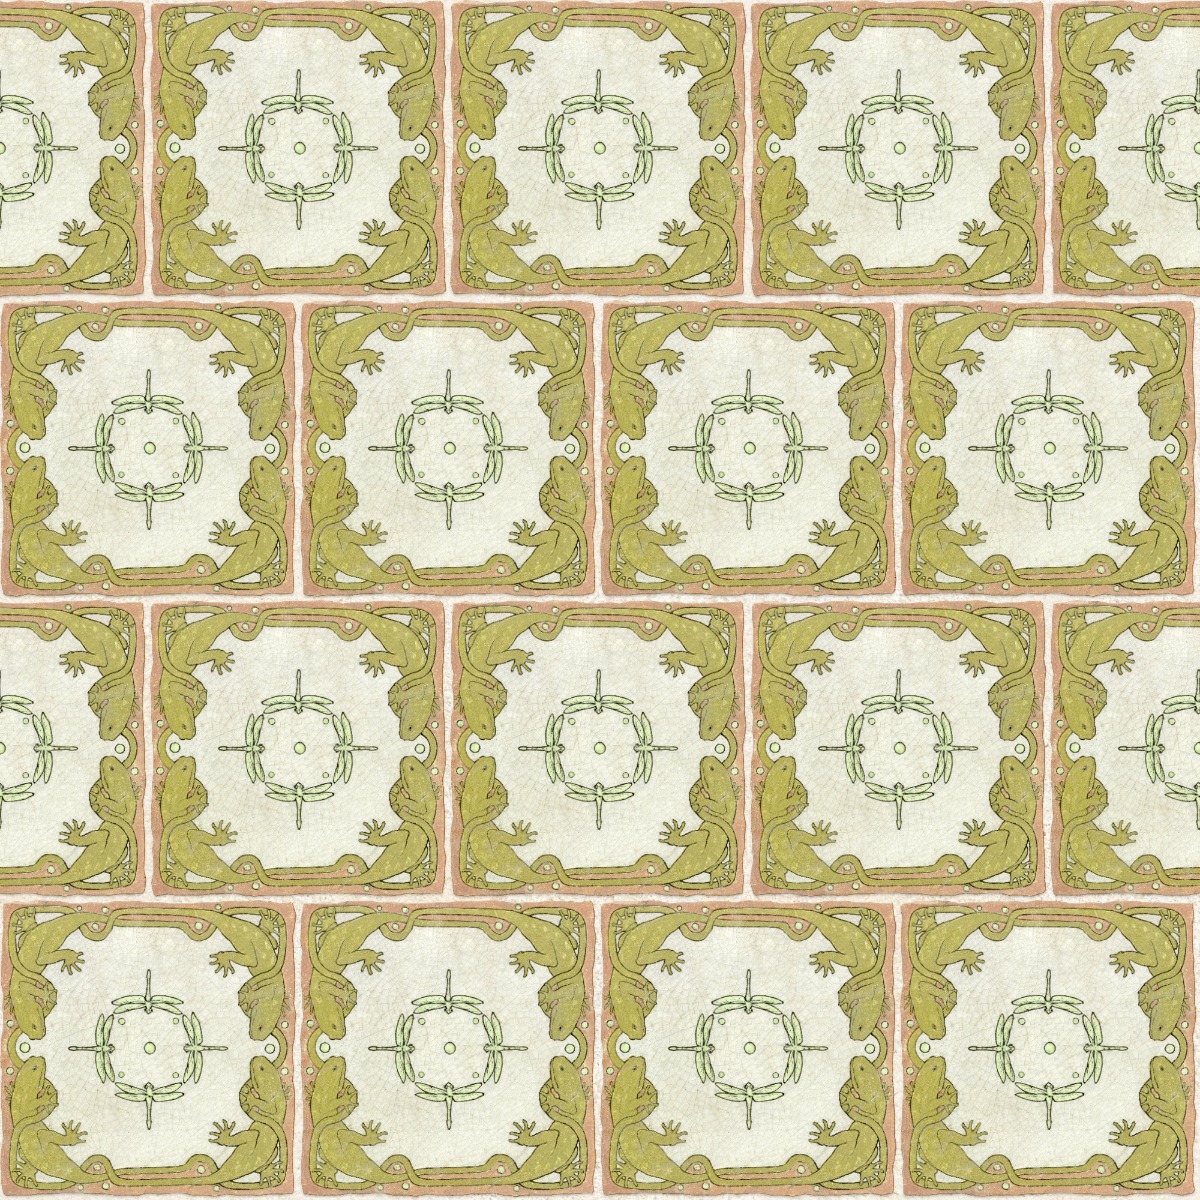 A seamless tile texture with lizard and dragonfly tile tiles arranged in a Stretcher pattern